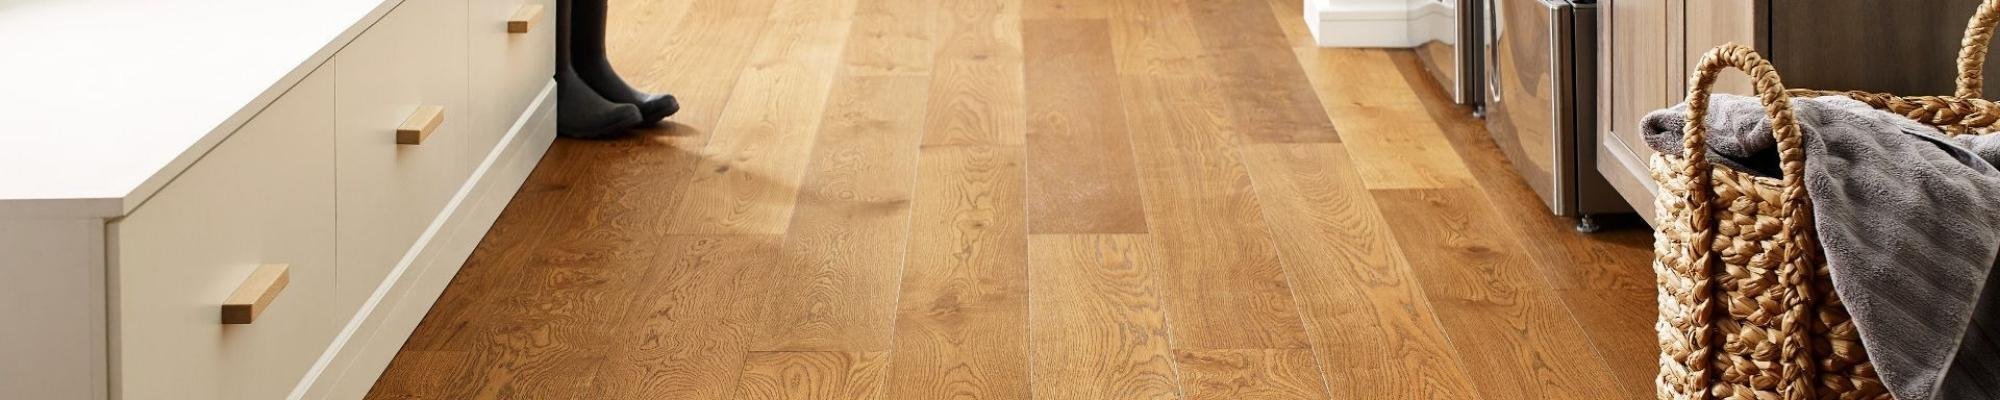 Hardwood Flooring from Ace Home & Hardware in Marshall